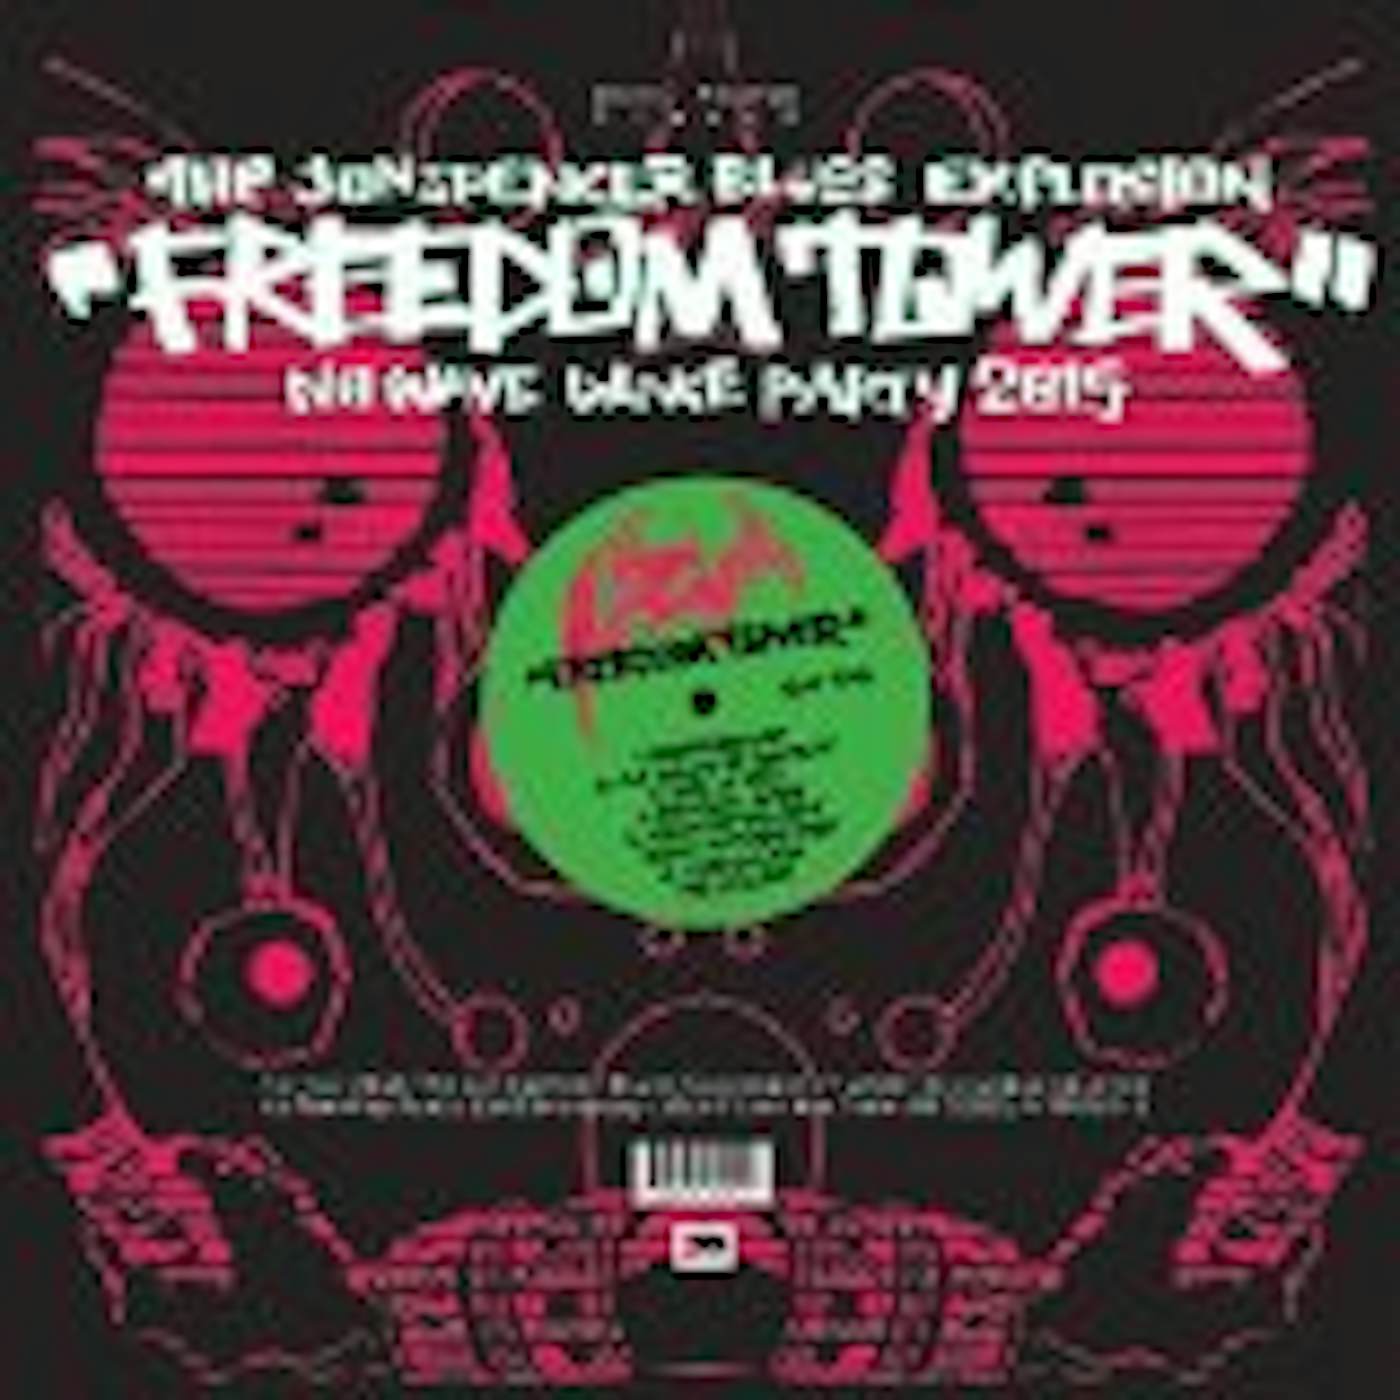 The Jon Spencer Blues Explosion FREEDOM TOWER: NO WAVE DANCE PARTY 2015 CD